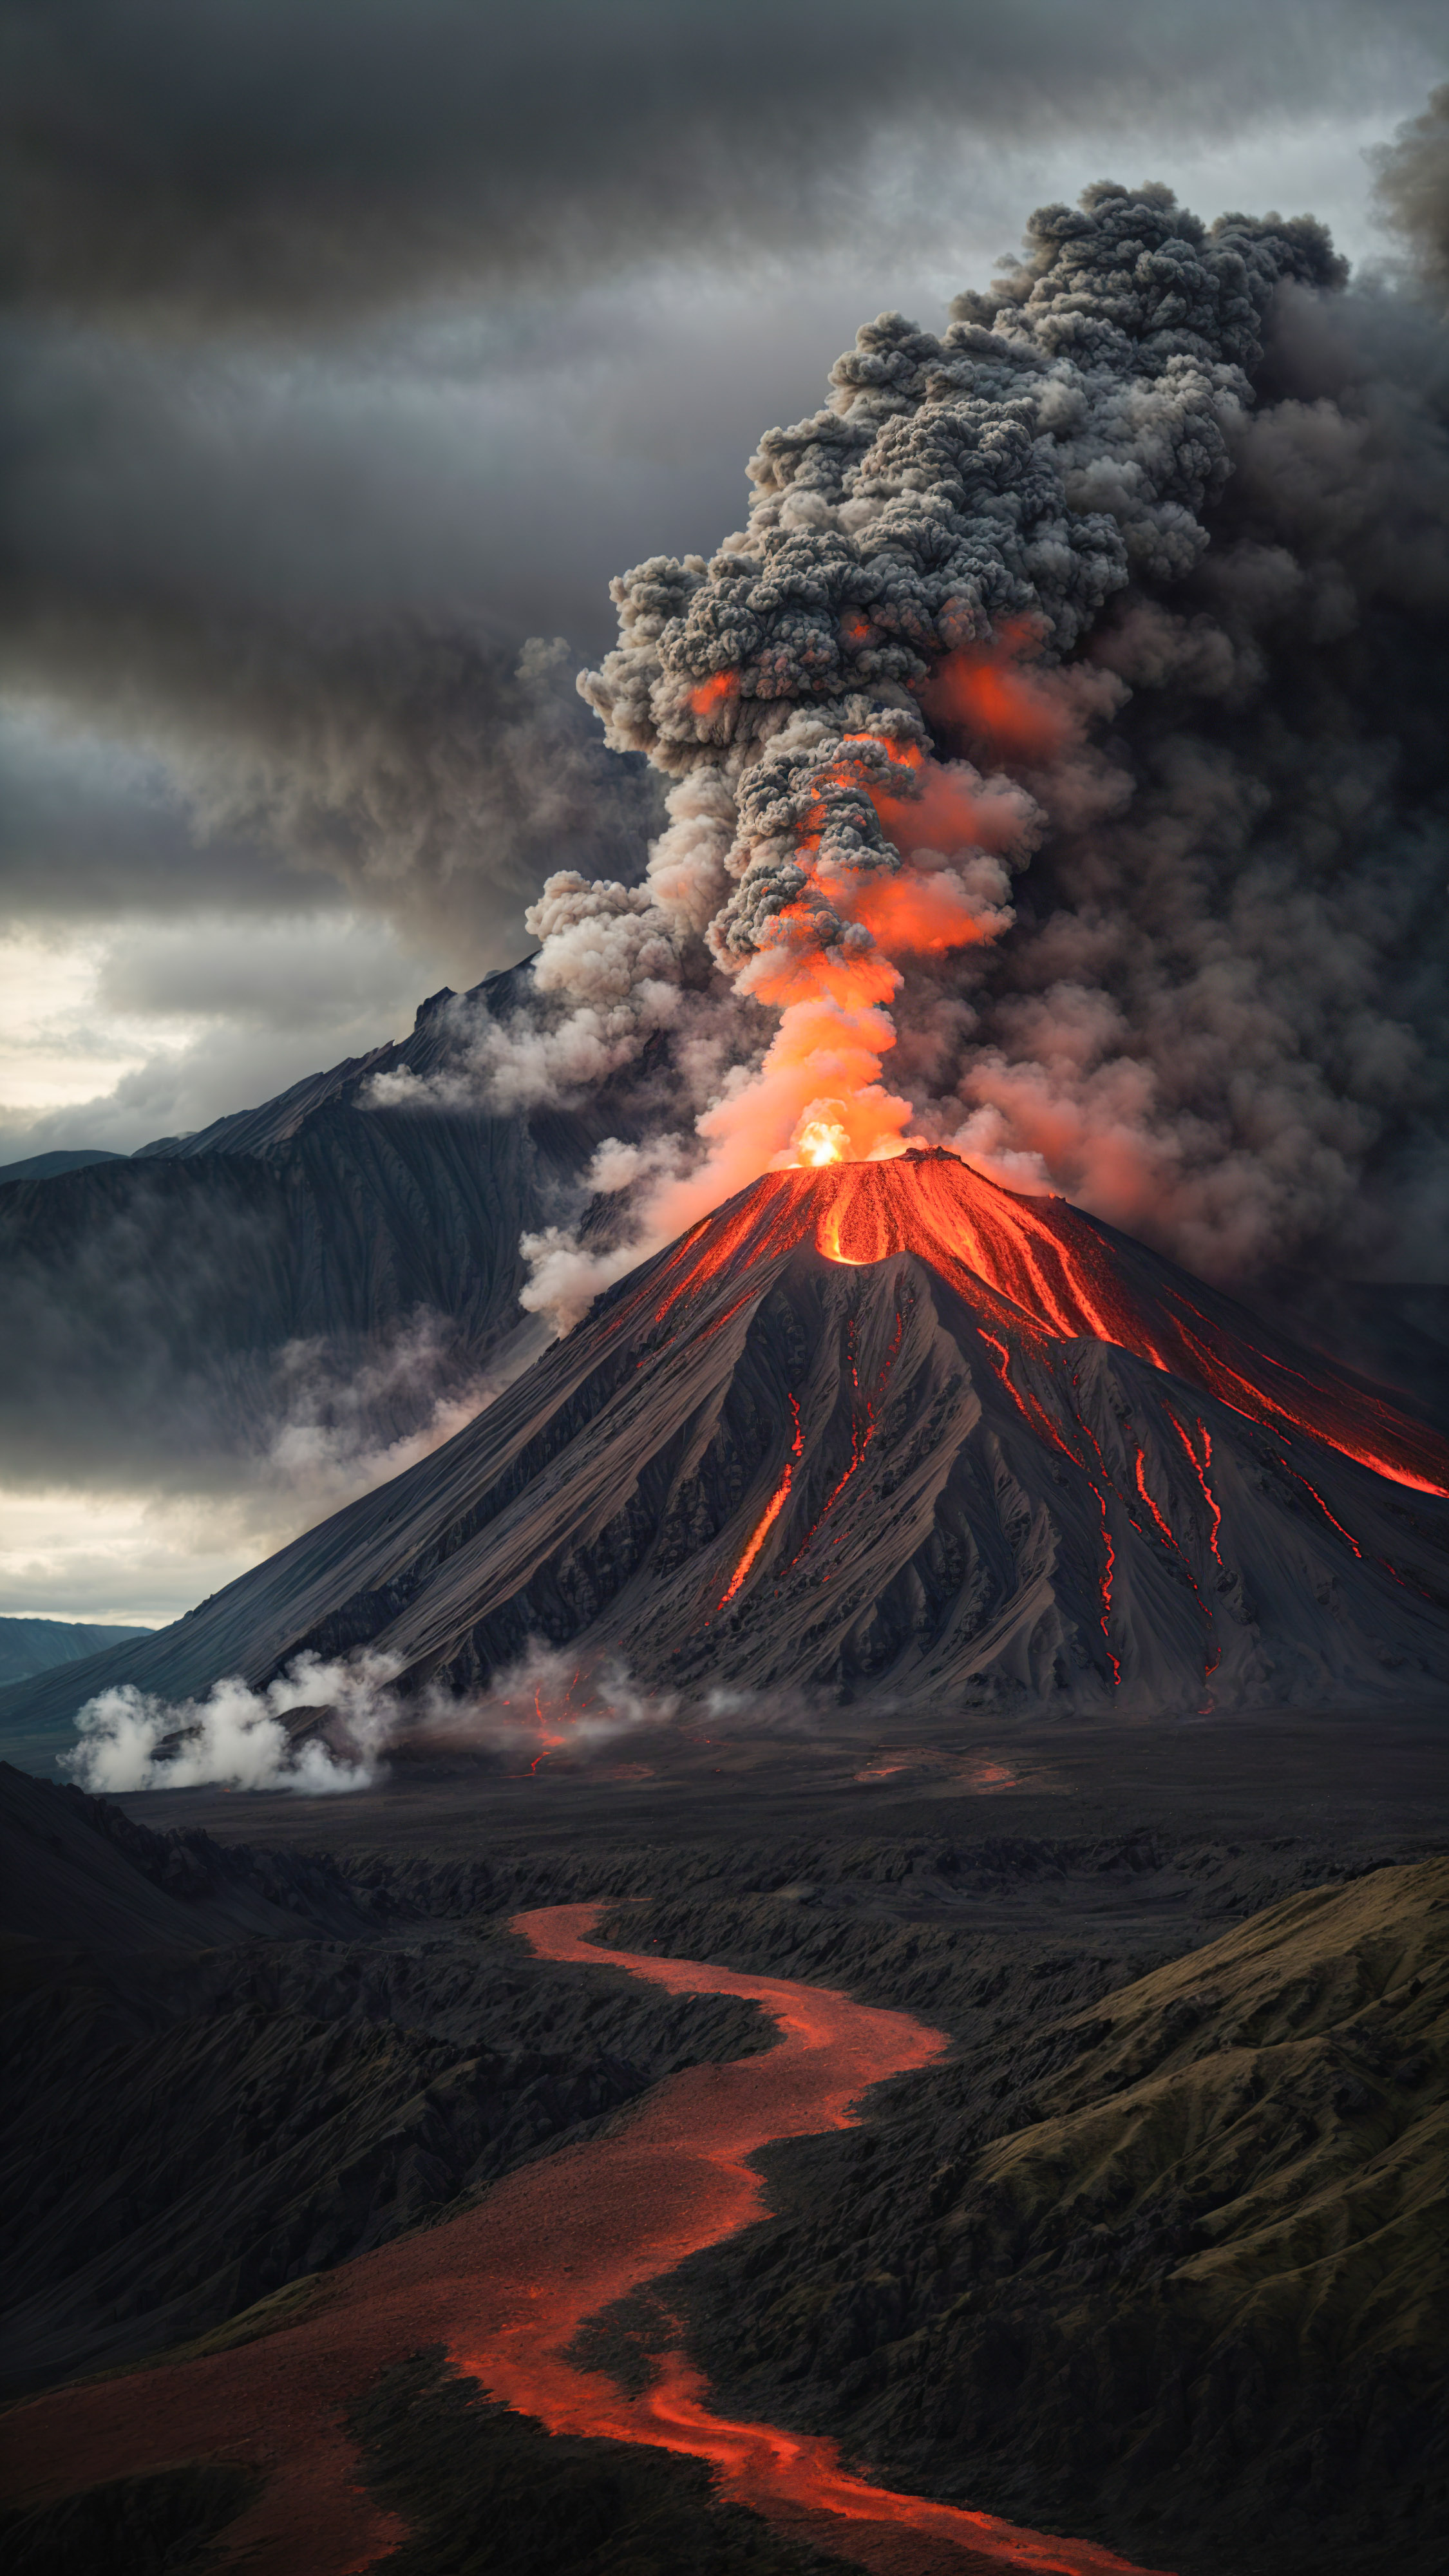 Experience the power of nature with a dark mountain background depicting a volcanic mountain with a smoking crater and a lava flow, under a dark and cloudy sky.